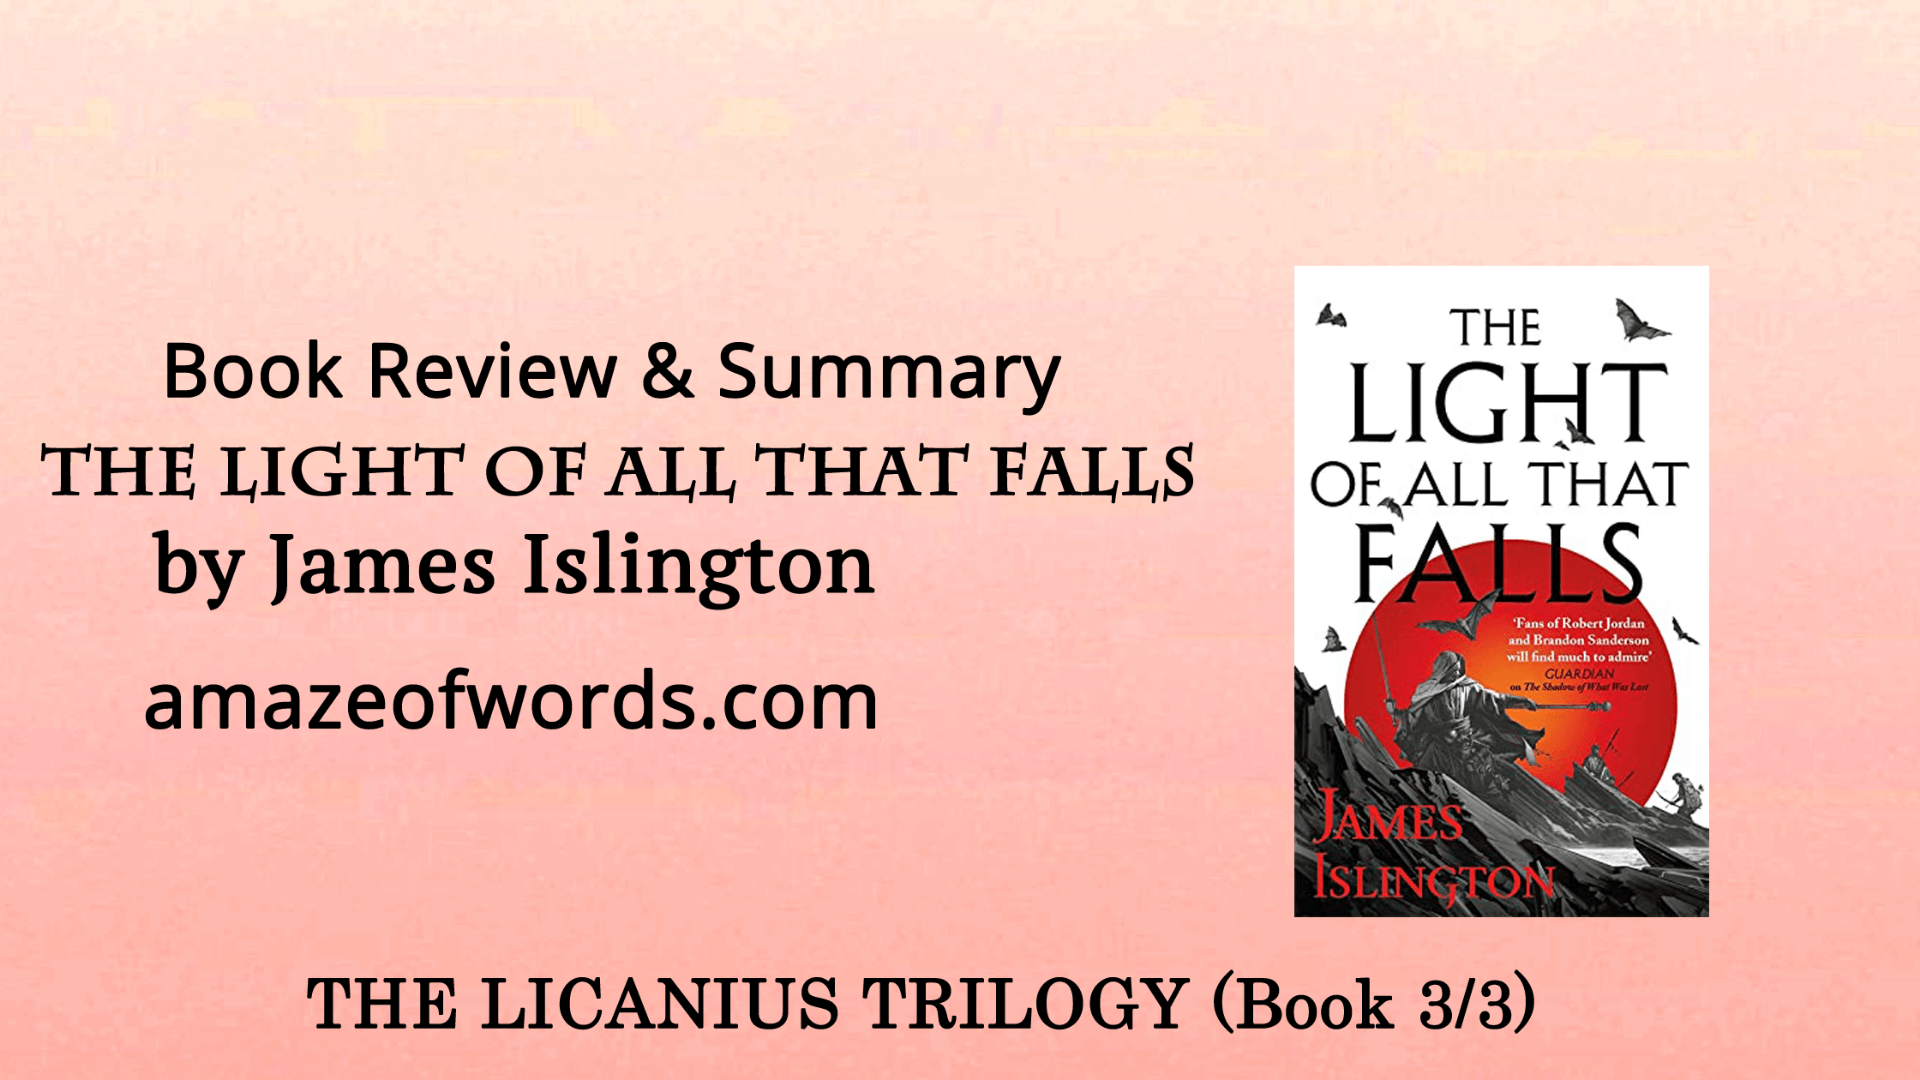 The Light of All That Falls by James Islington — Book Review & Summary